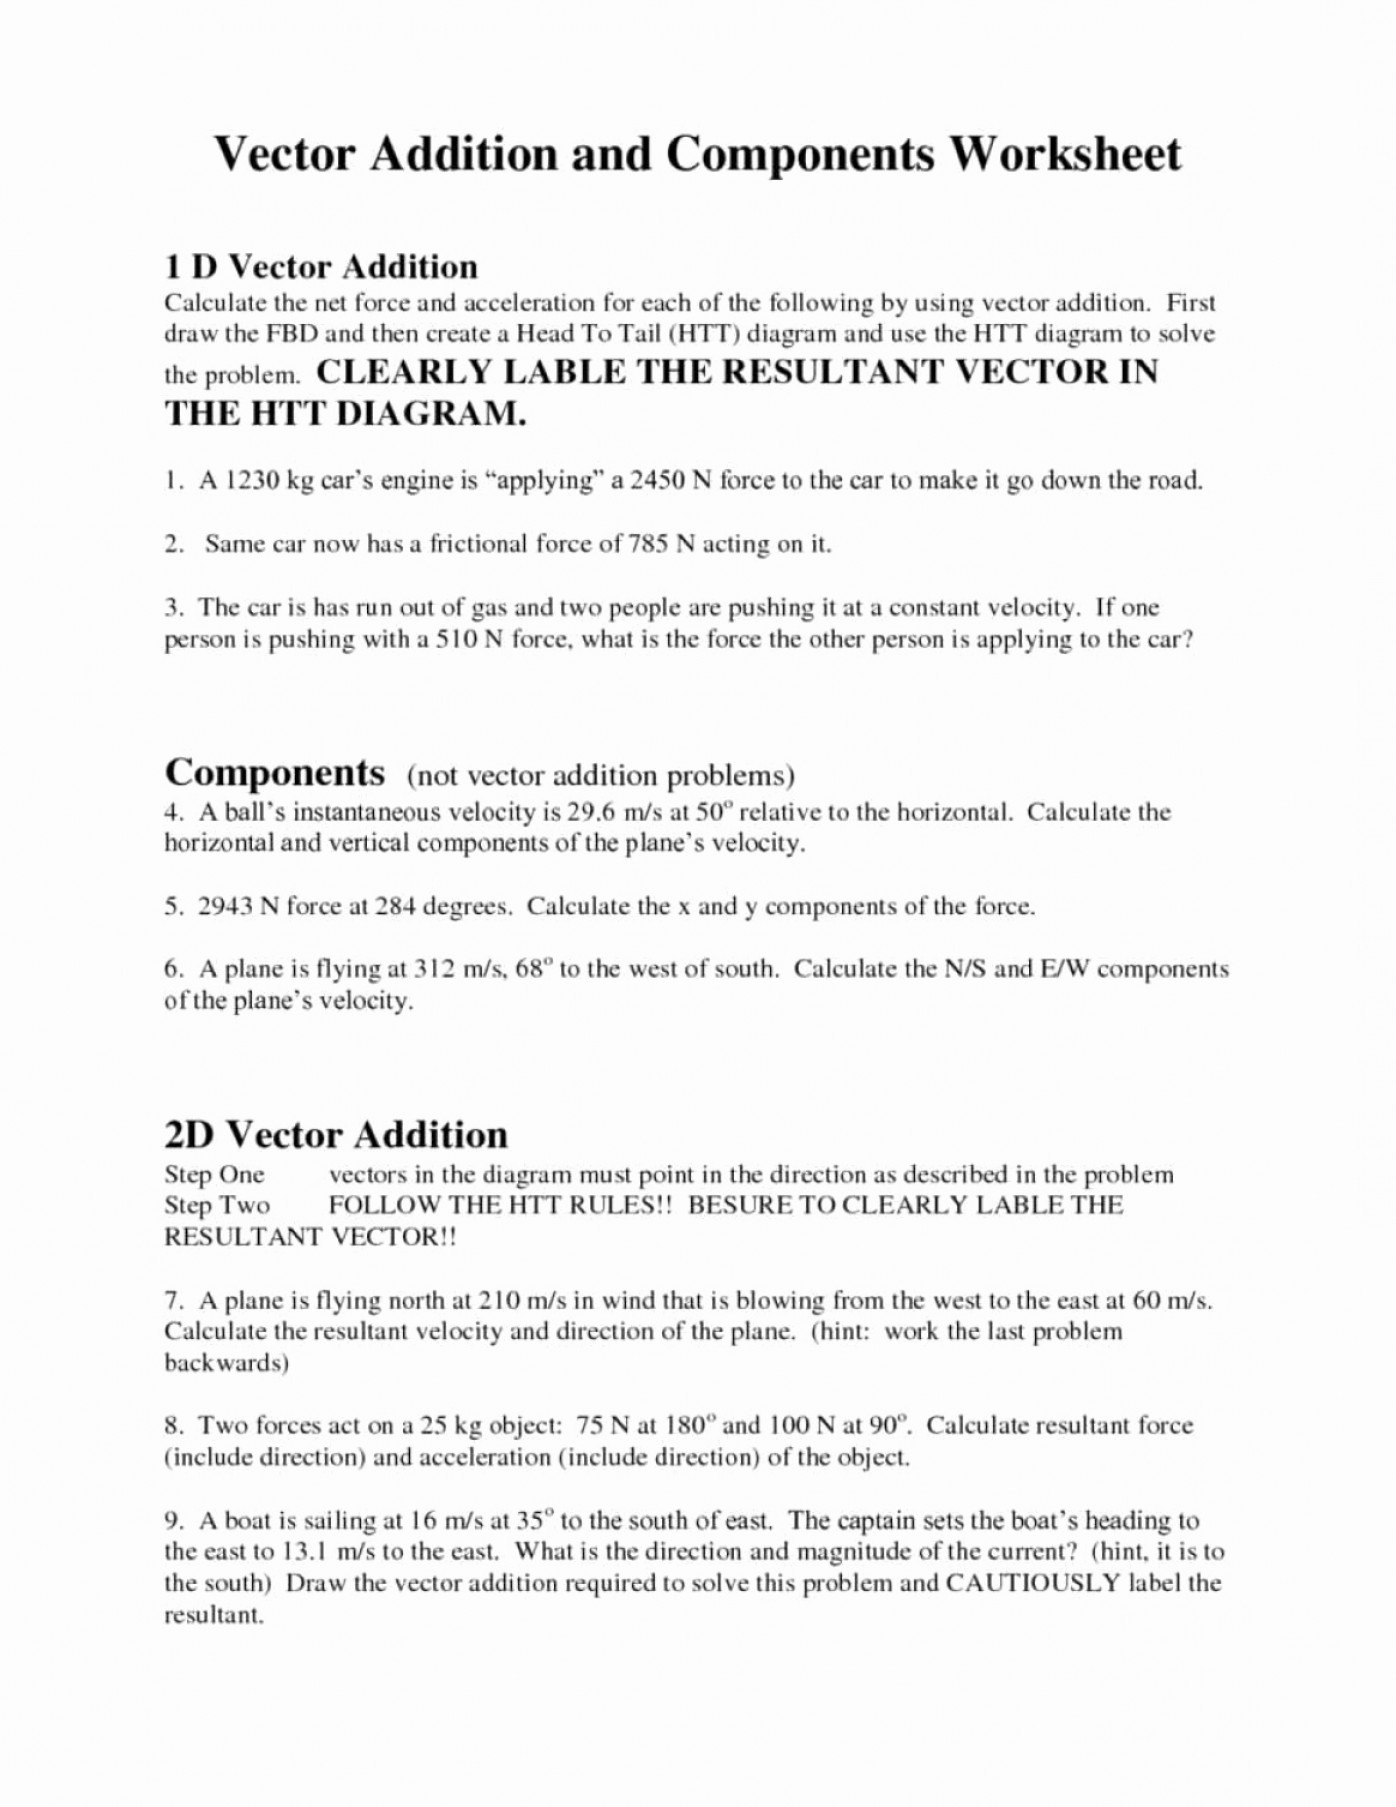 Vector Addition Worksheet Answers Best Of Vectors And